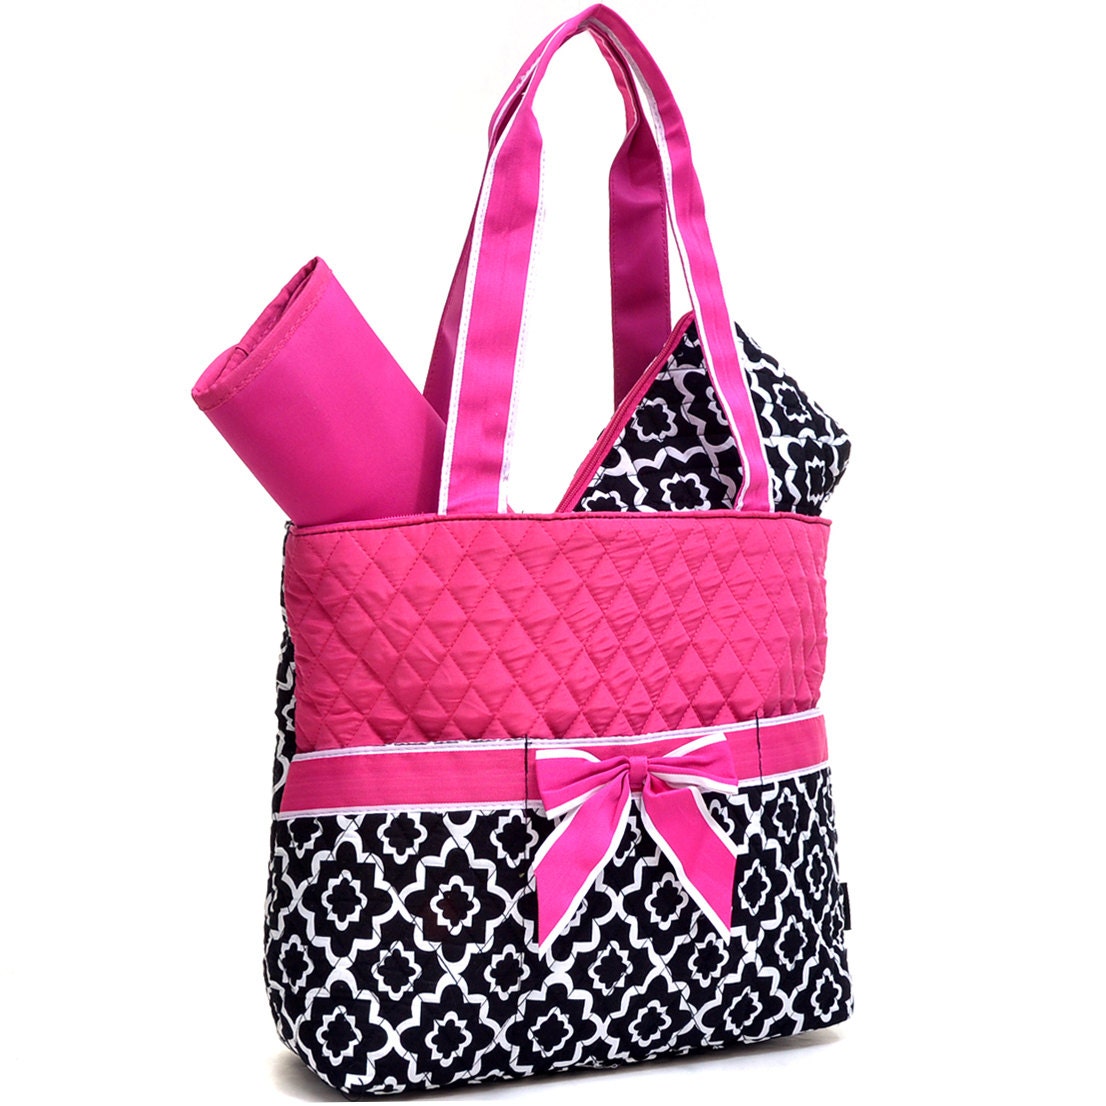 Diaper Bag/Monogram Pink and black Diaper by sewsassybootique